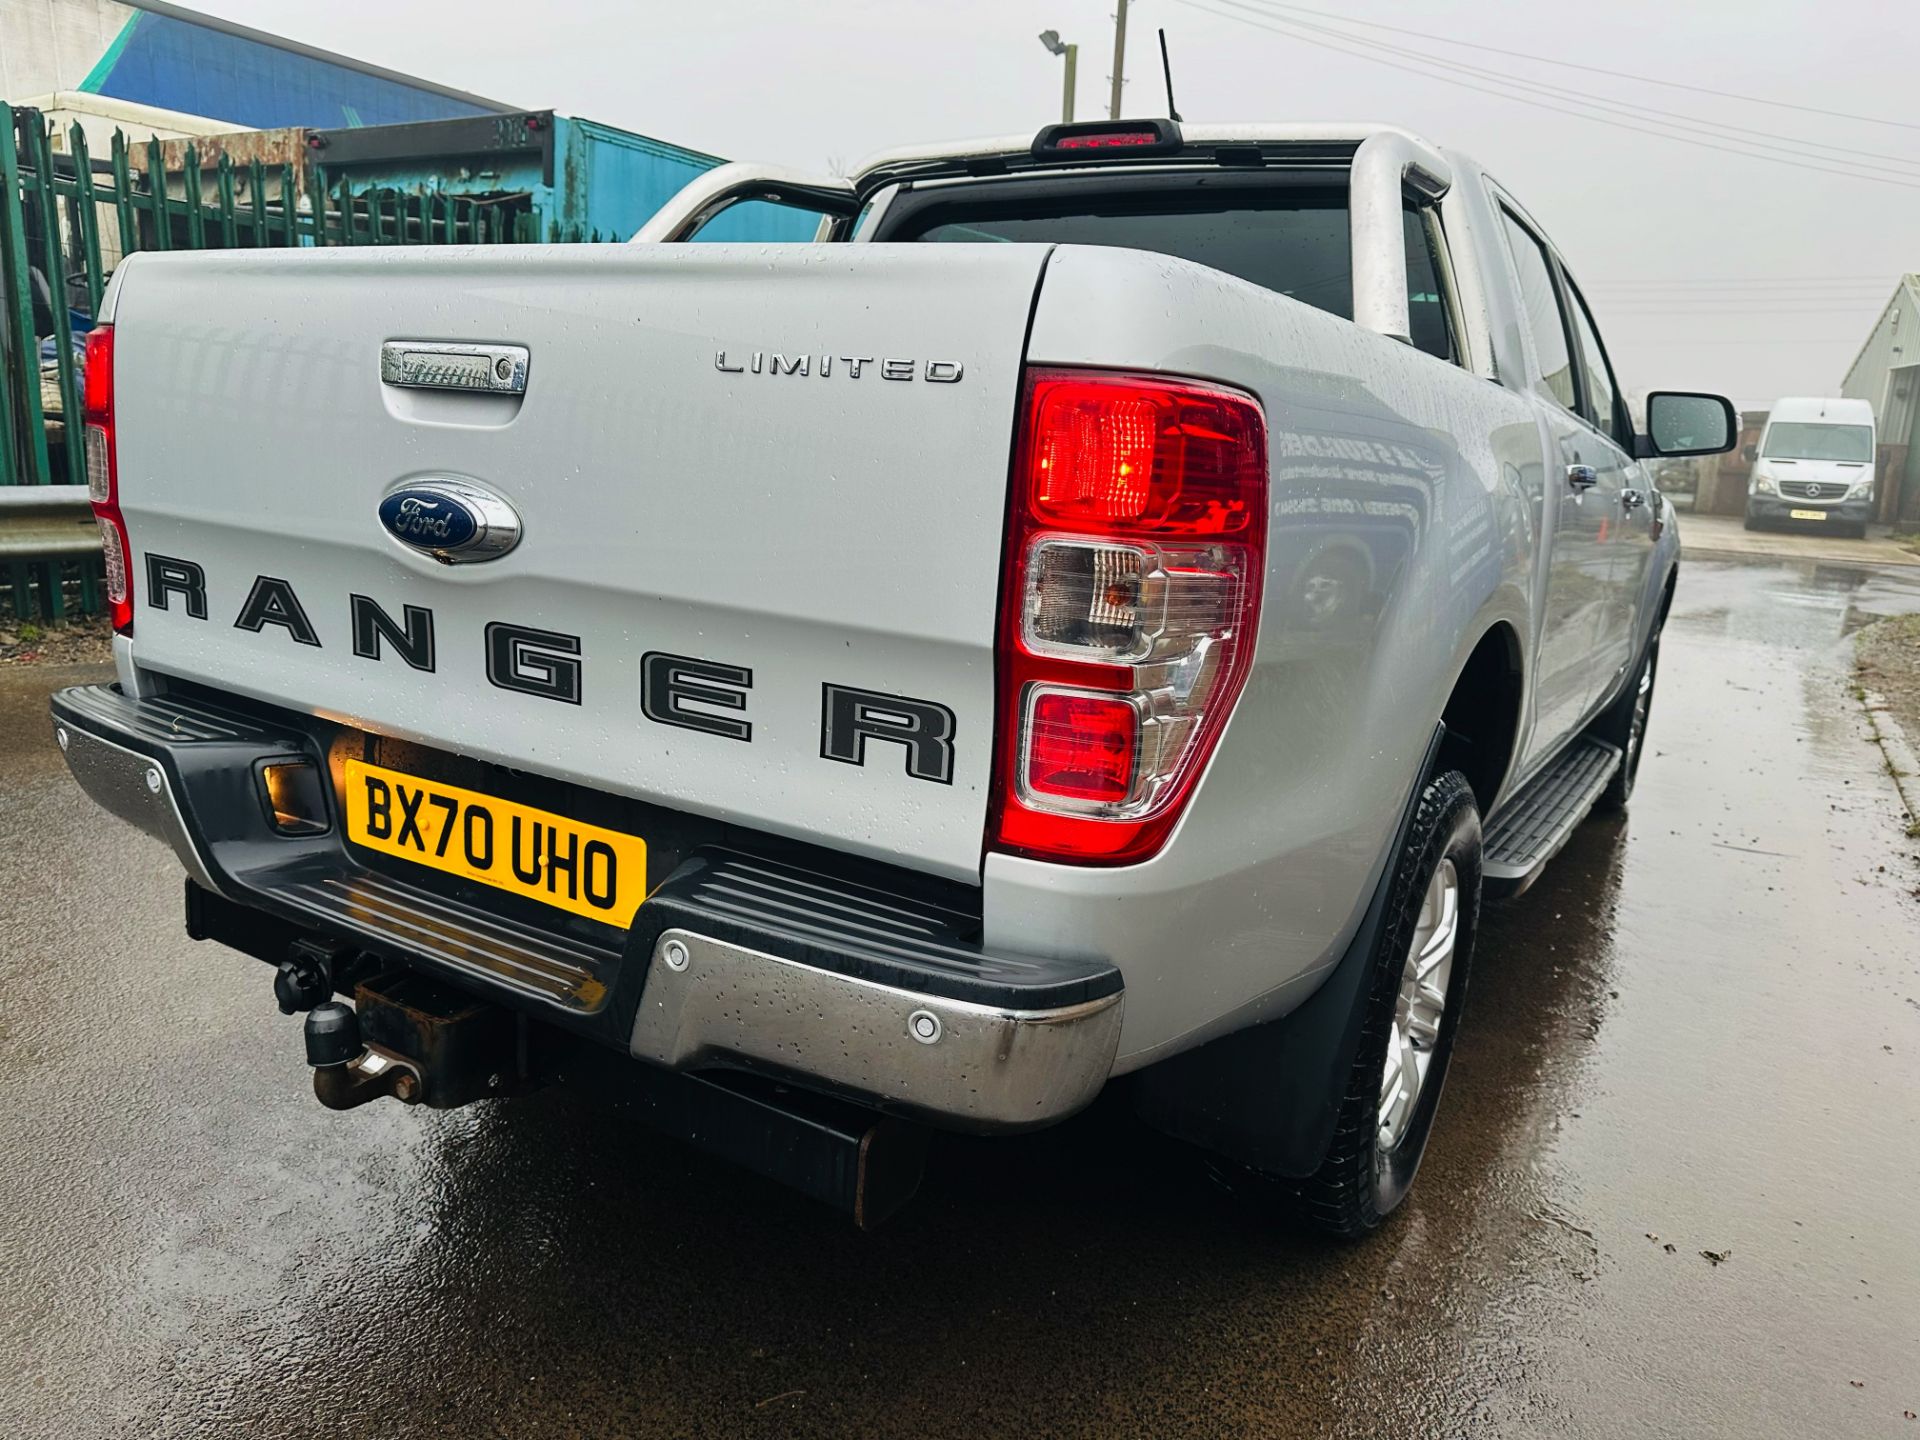 Ford Ranger 2.0 TDCI LIMITED 170BHP Auto SS (2021 Model) Huge Spec -Sat Nav Leather 35k Miles Only - Image 12 of 44